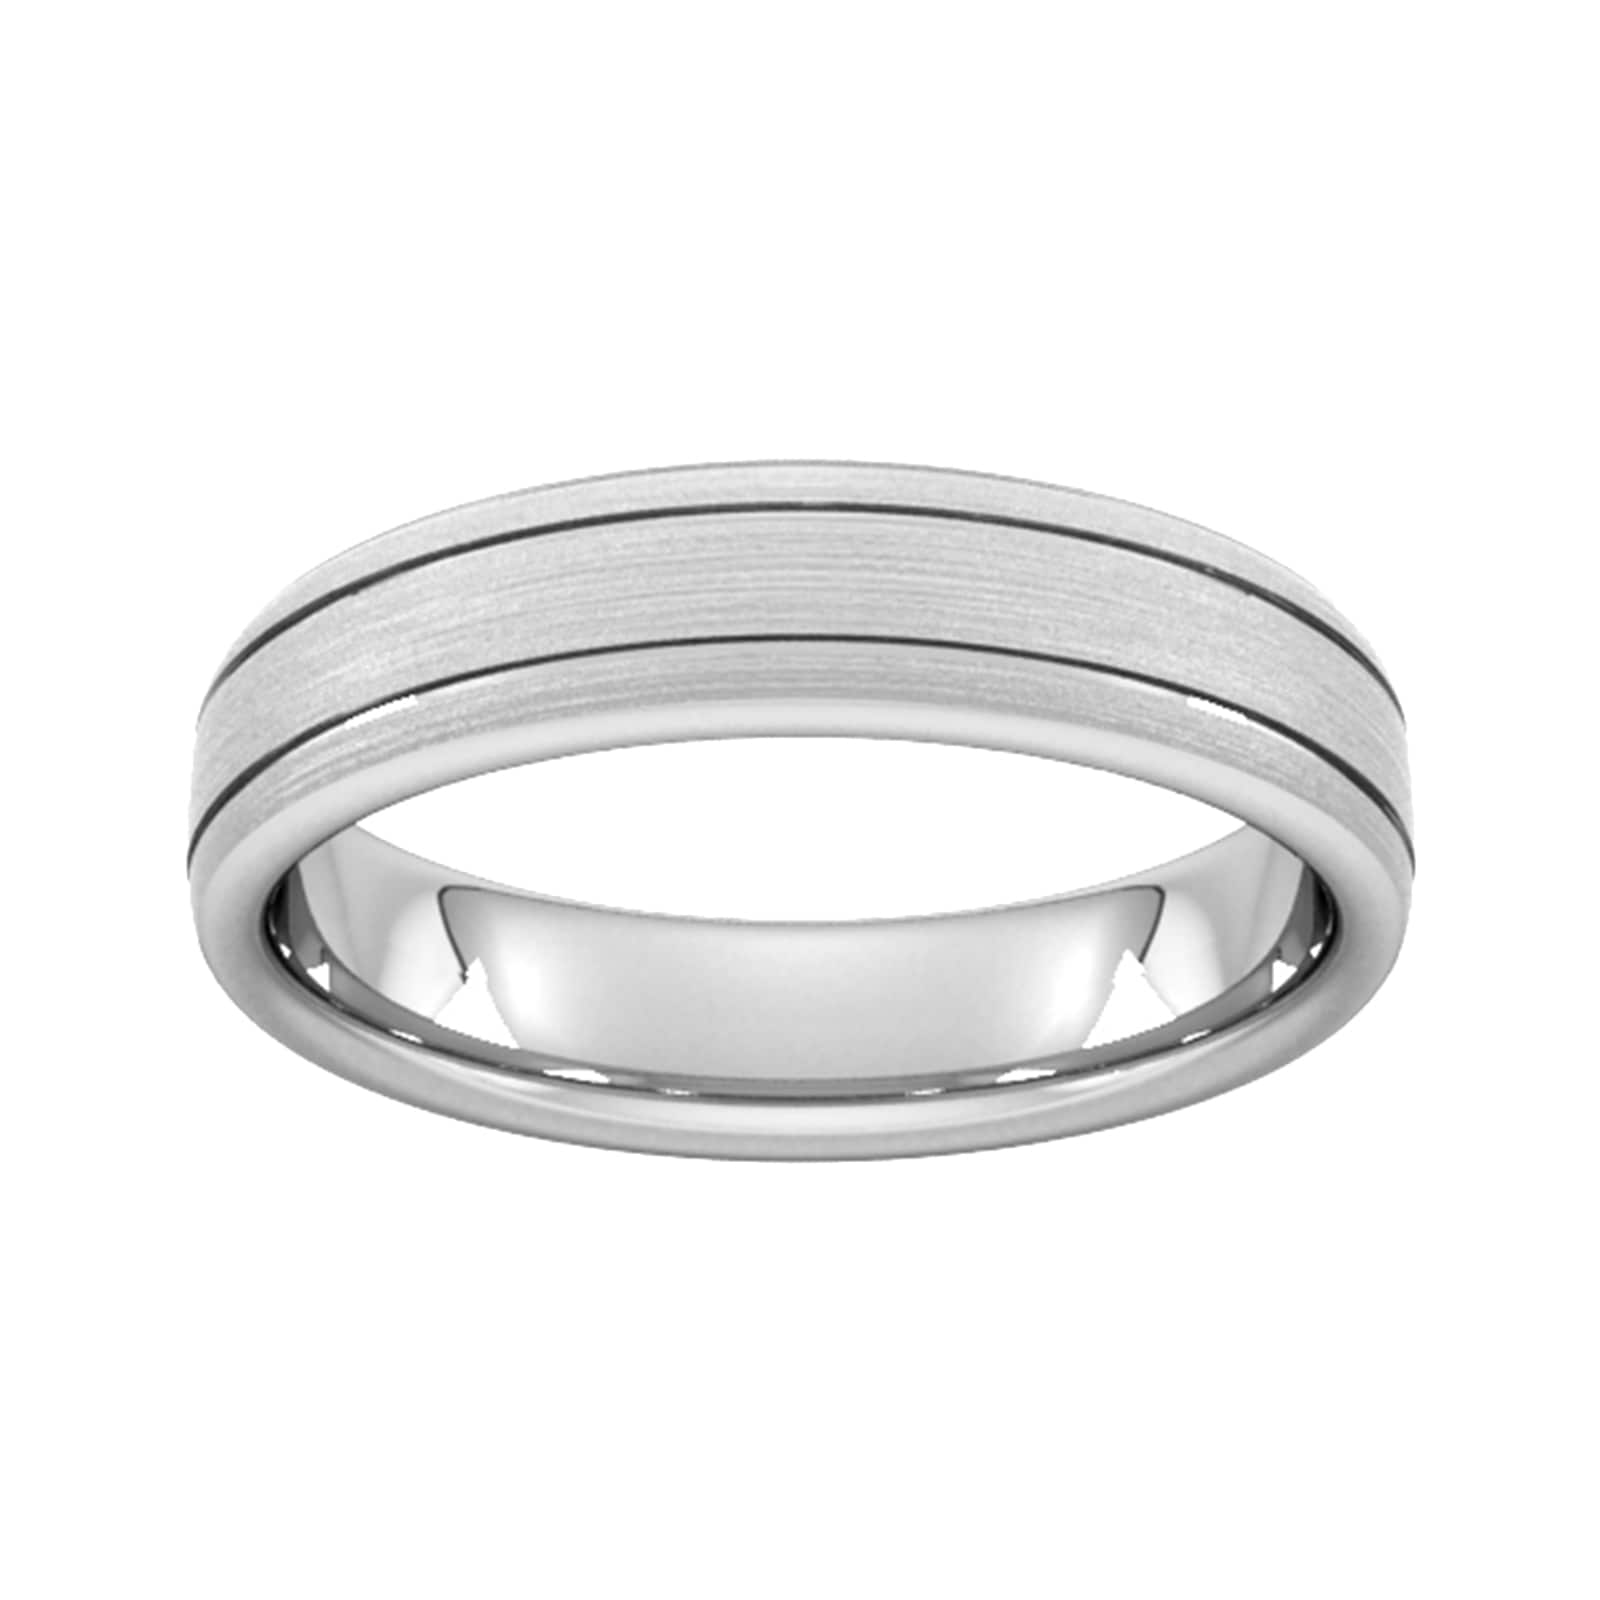 5mm Flat Court Heavy Matt Finish With Double Grooves Wedding Ring In 950 Palladium - Ring Size M